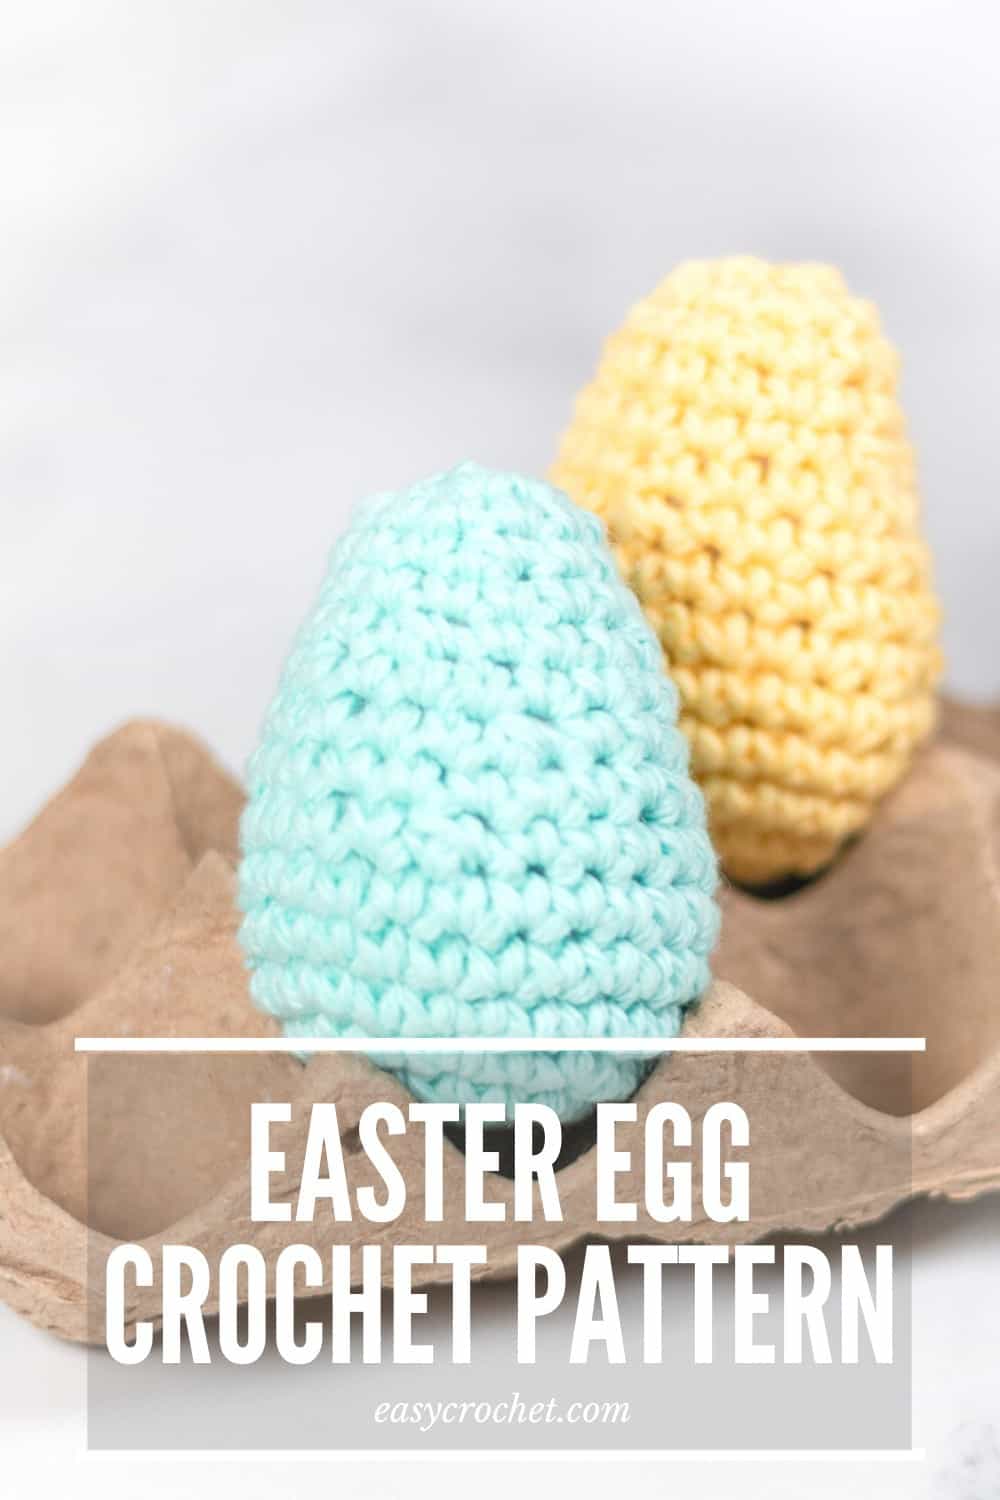 Free Easter Egg Crochet Pattern by Easy Crochet. Make this fun Easter crochet pattern and reuse them year and year again! via @easycrochetcom